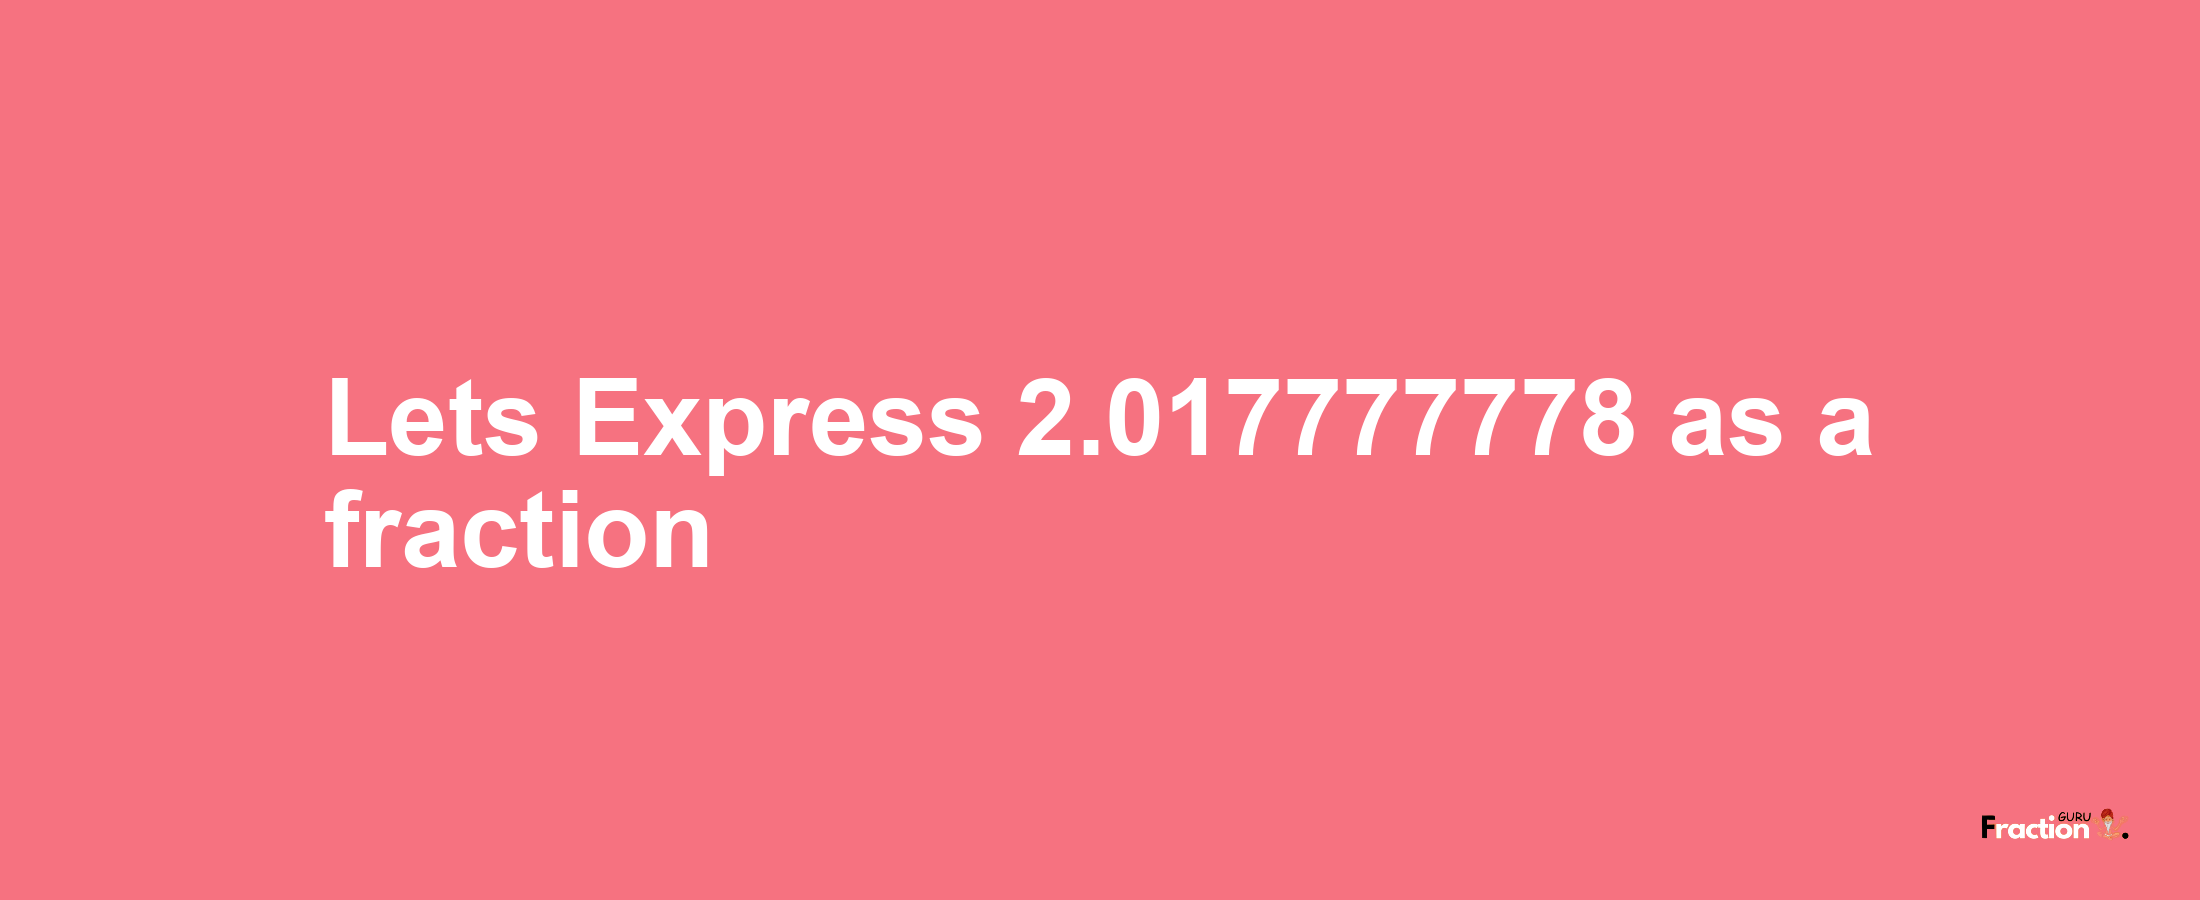 Lets Express 2.017777778 as afraction